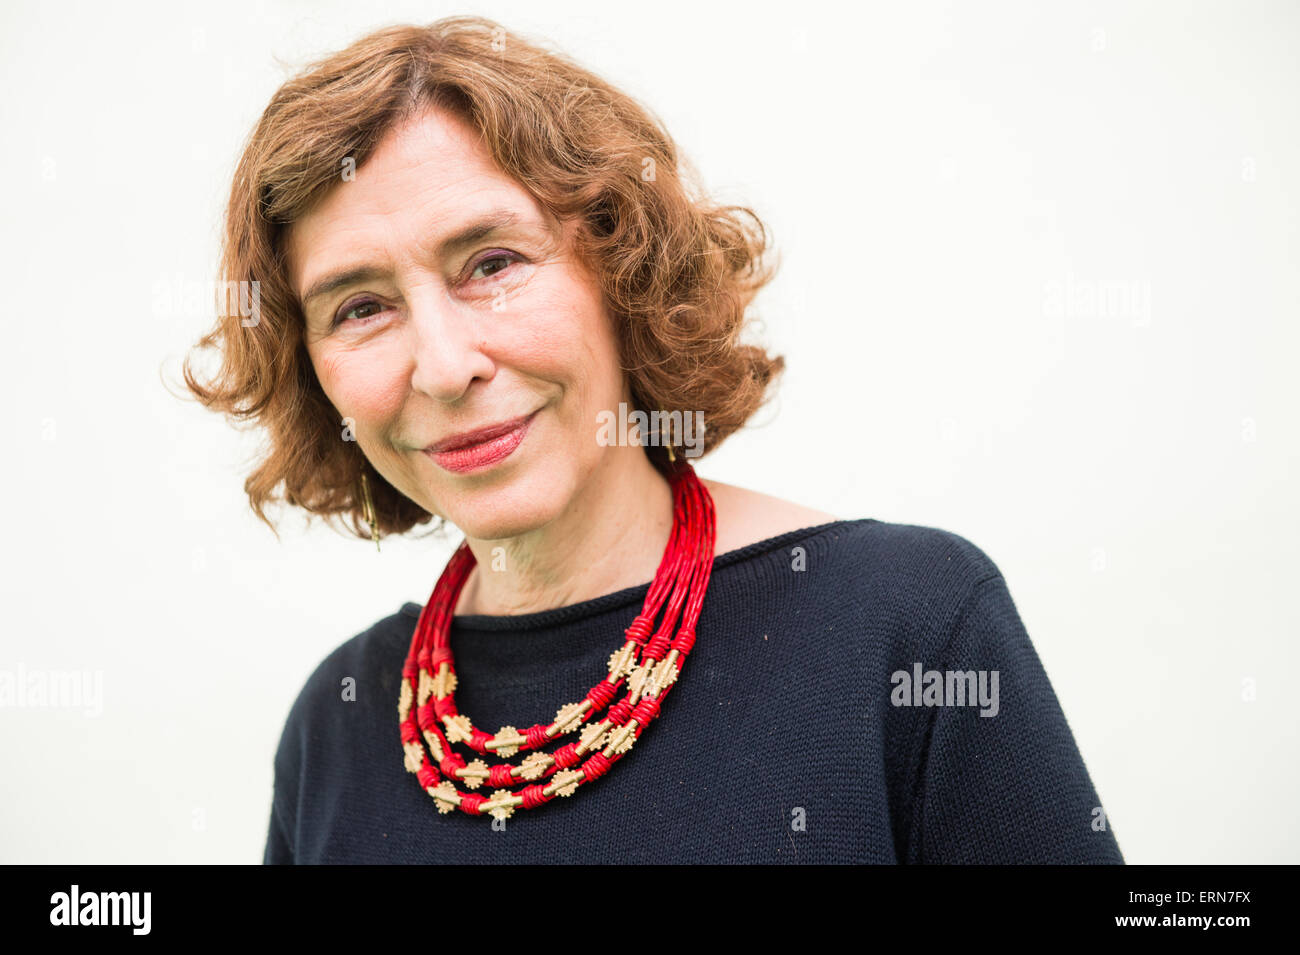 AZAR NAFISI, Hay Literature Festival 2015 Best known for her 2003 book Reading Lolita in Tehran: A Memoir in Books, which remained on the New York Times Bestseller list for 117 weeks, and has won several literary awards, including the 2004 Non-fiction Book of the Year Award from Booksense Stock Photo